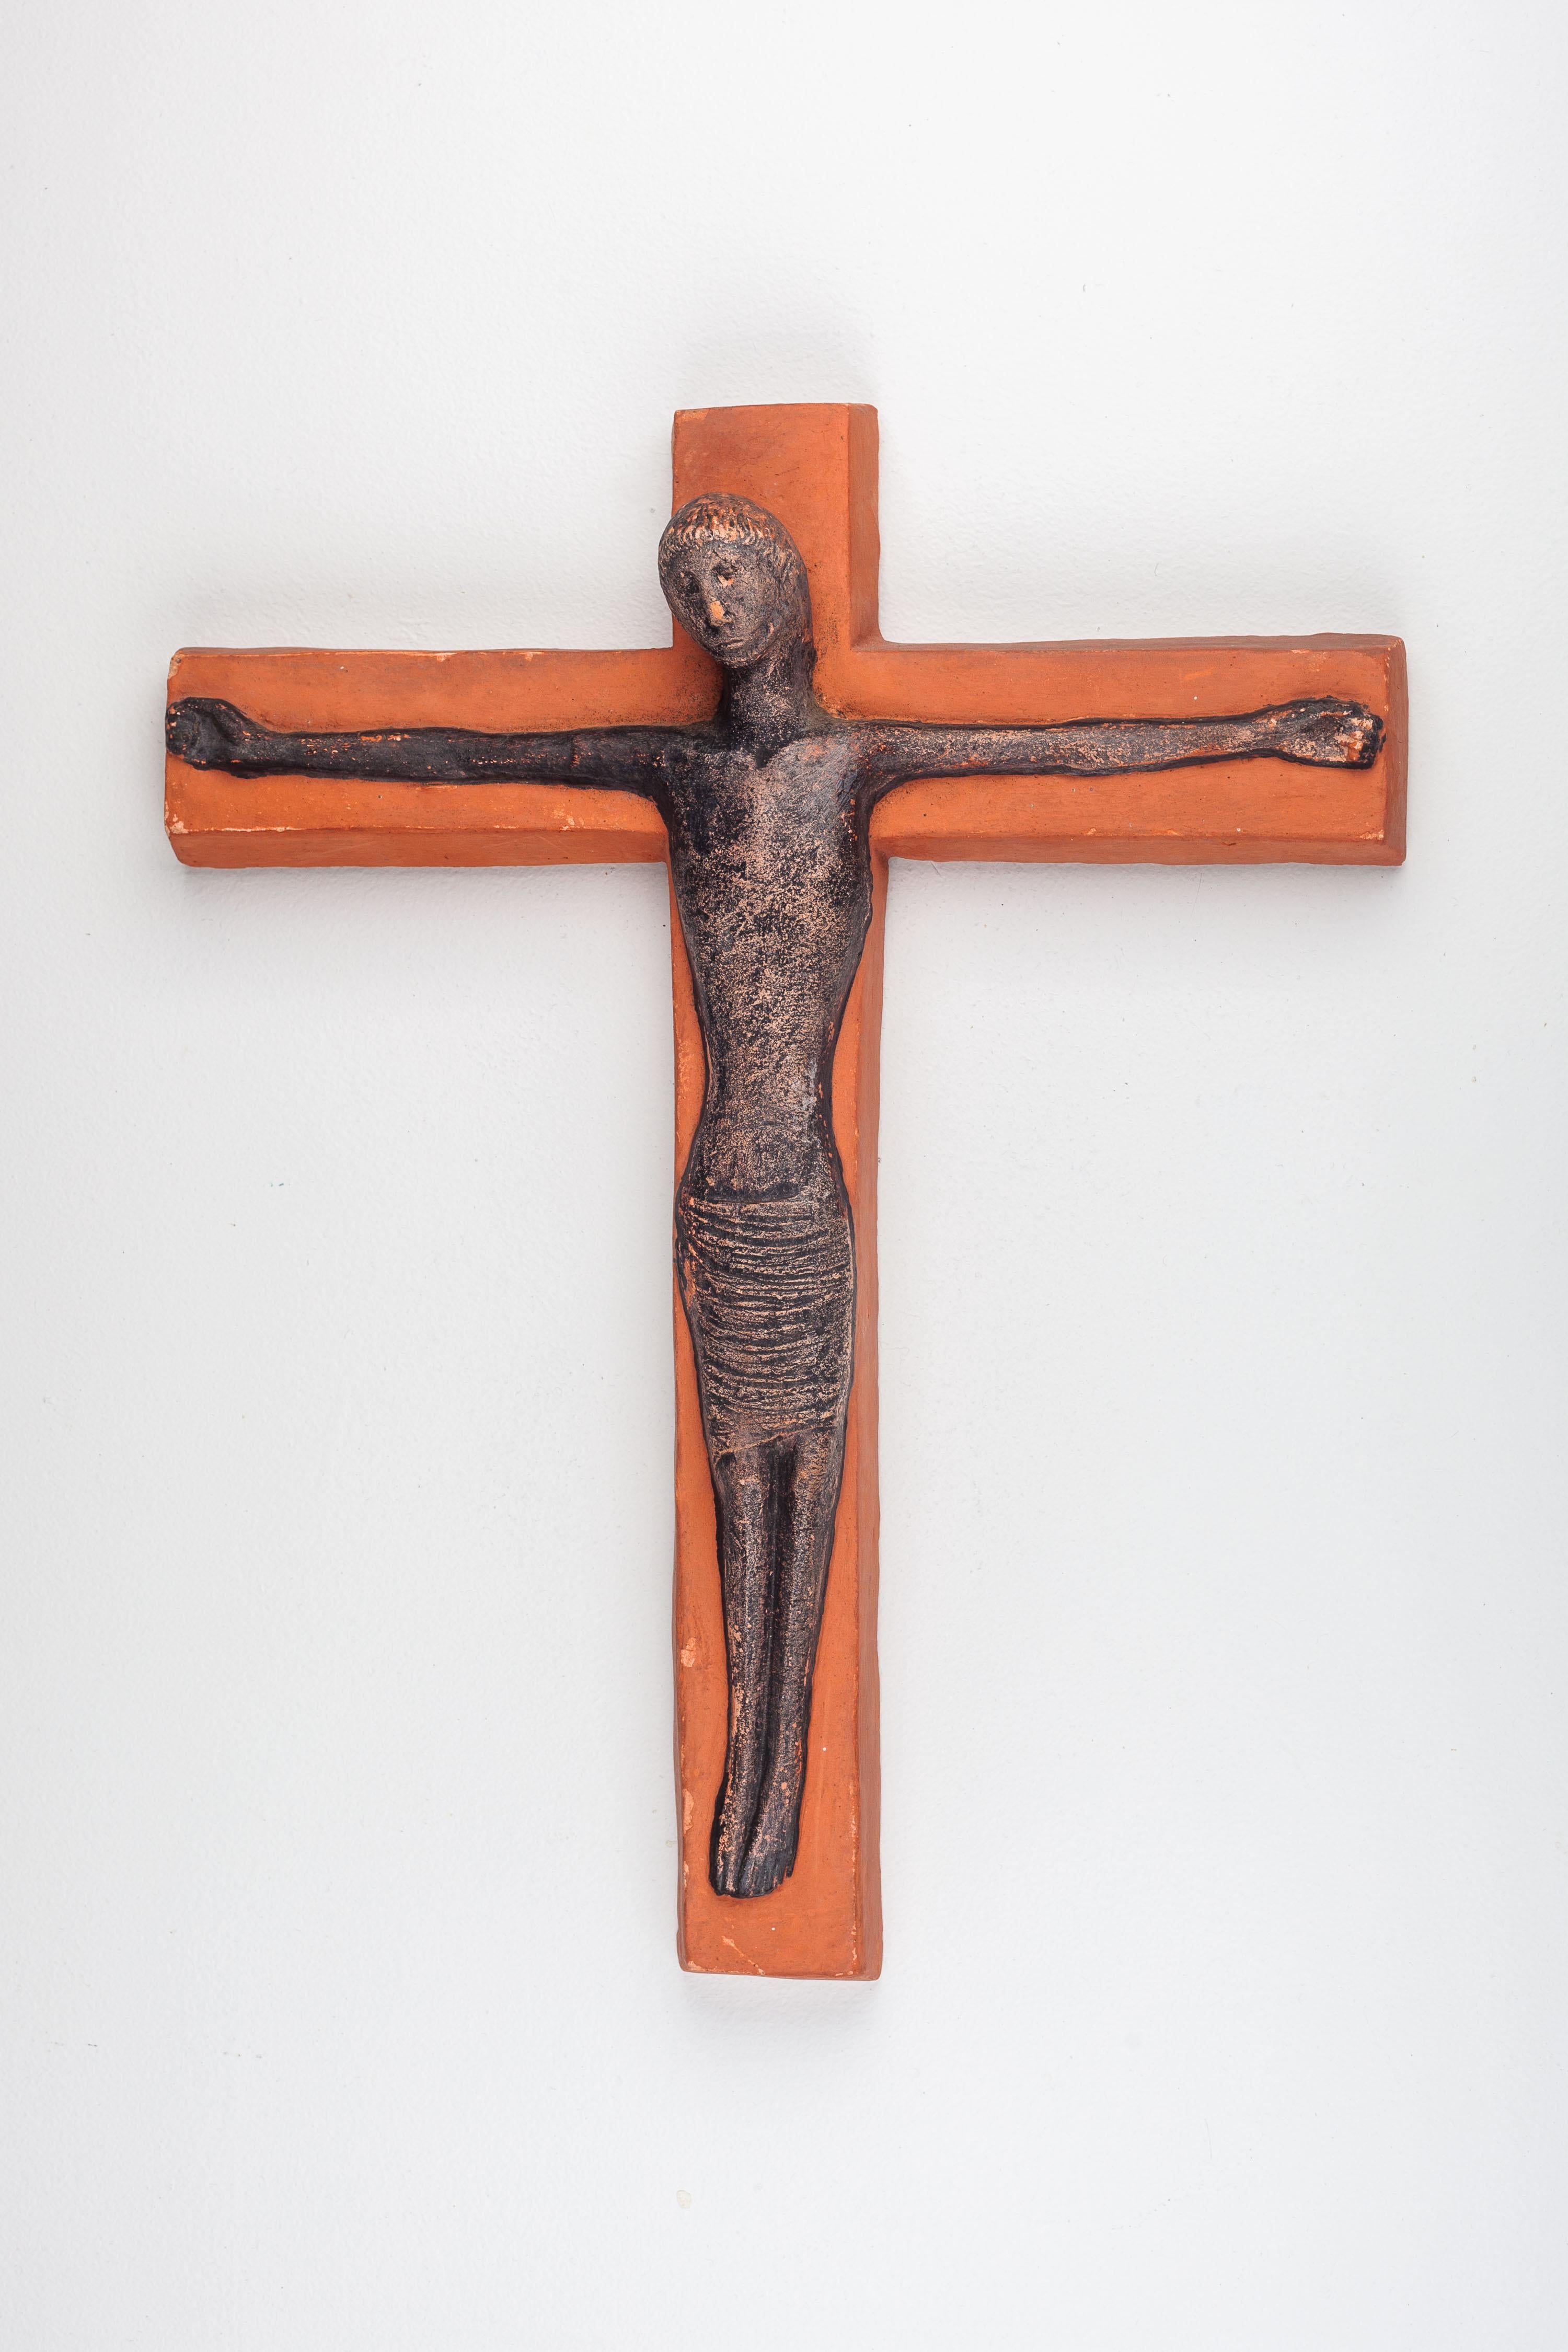 This substantial 16-inch wall cross, crafted in matte terracotta, showcases a black Christ figure with subtle earthy accents. Its impressive proportions and modernist design highlight a compassionate depiction of Christ. The inclined head position